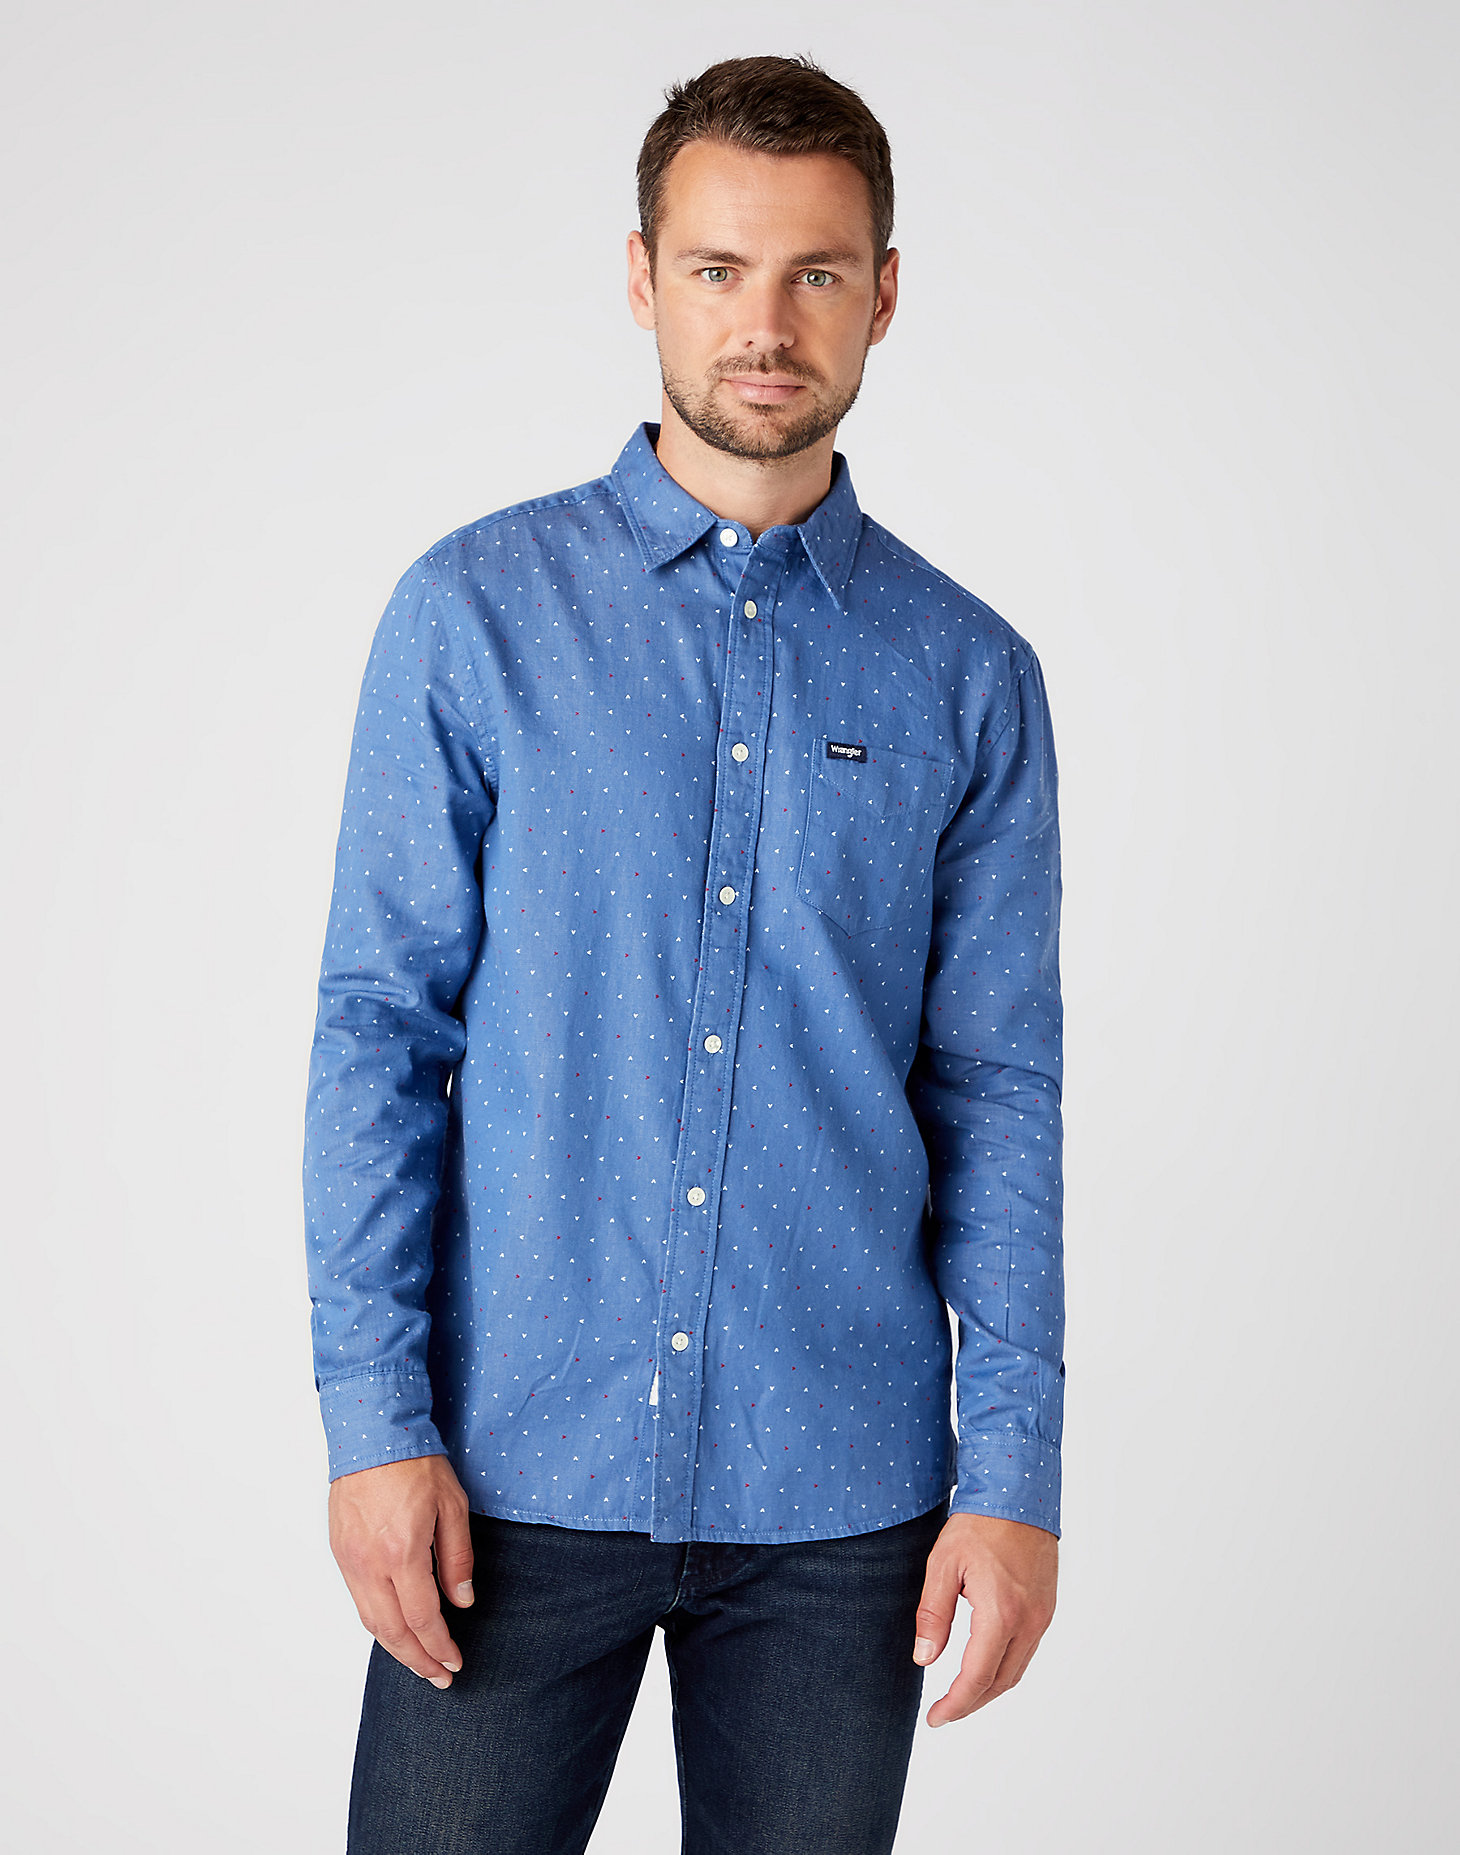 One Pocket Shirt in Navy main view